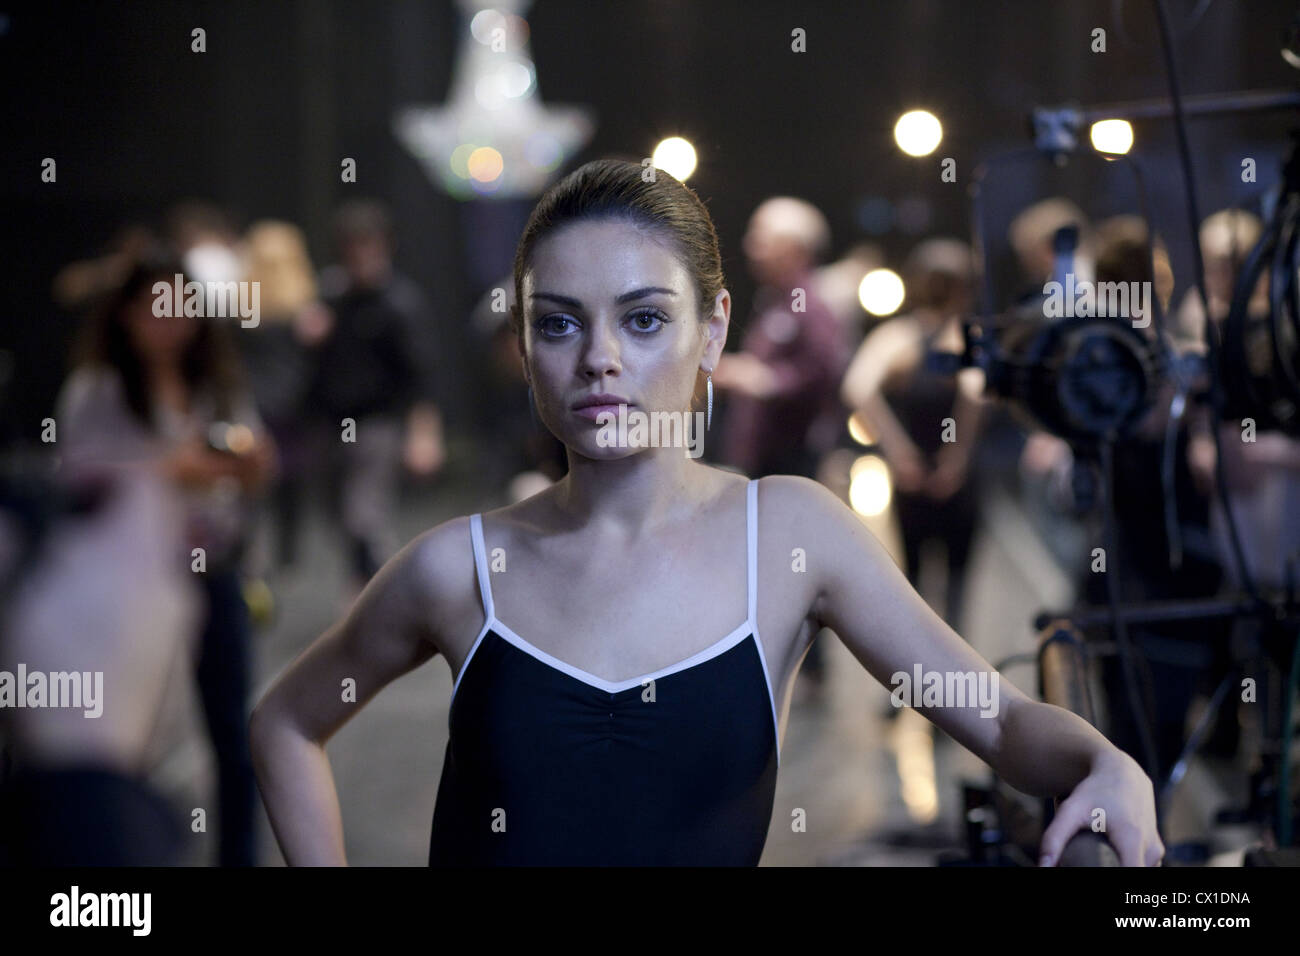 ITAR-TASS: MOSCOW, RUSSIA. FEBRUARY 3, 2011. Actress Kunis as Lily in a scene from Darren Aronofsky's Black Swan, a psychological thriller set in the world of New York City ballet. (Photo